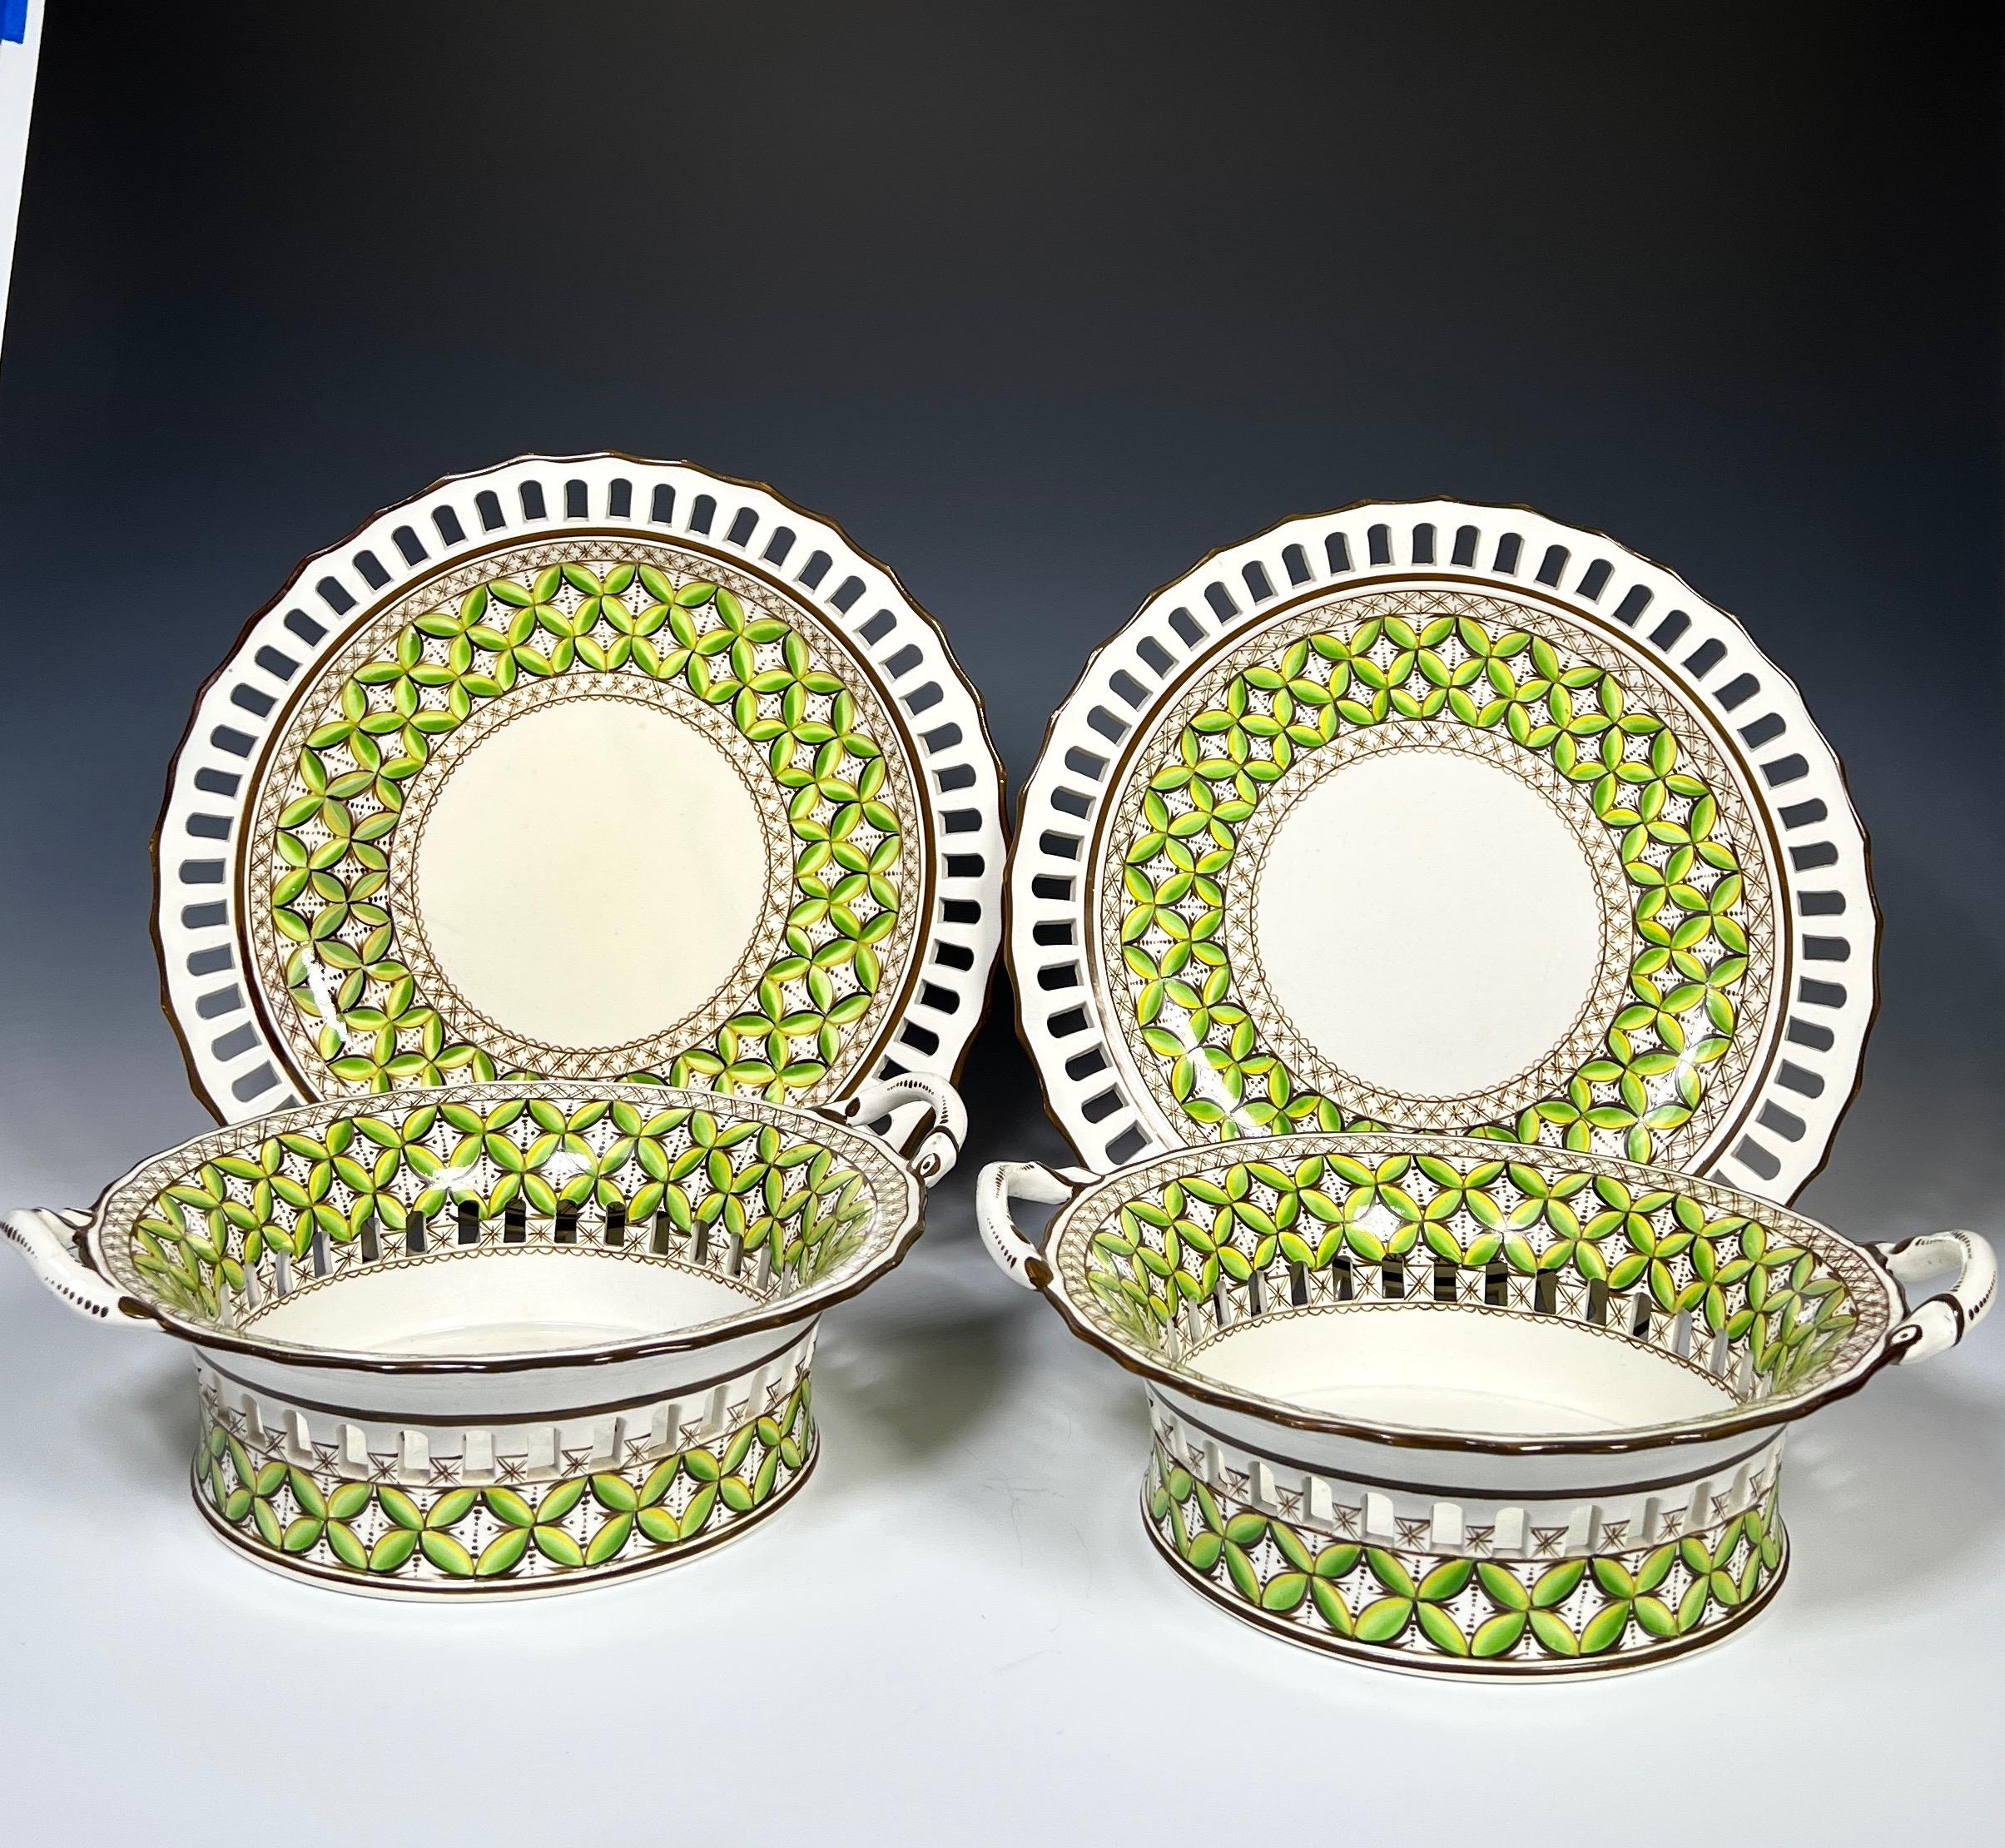 This pair of rare 19th c Spode Chestnut bowls are in amazing original condition and feature a green enamel leaf motif with pierced border. Each has two handles and basketweave on both the baskets and the matching under plates. Retailed later by